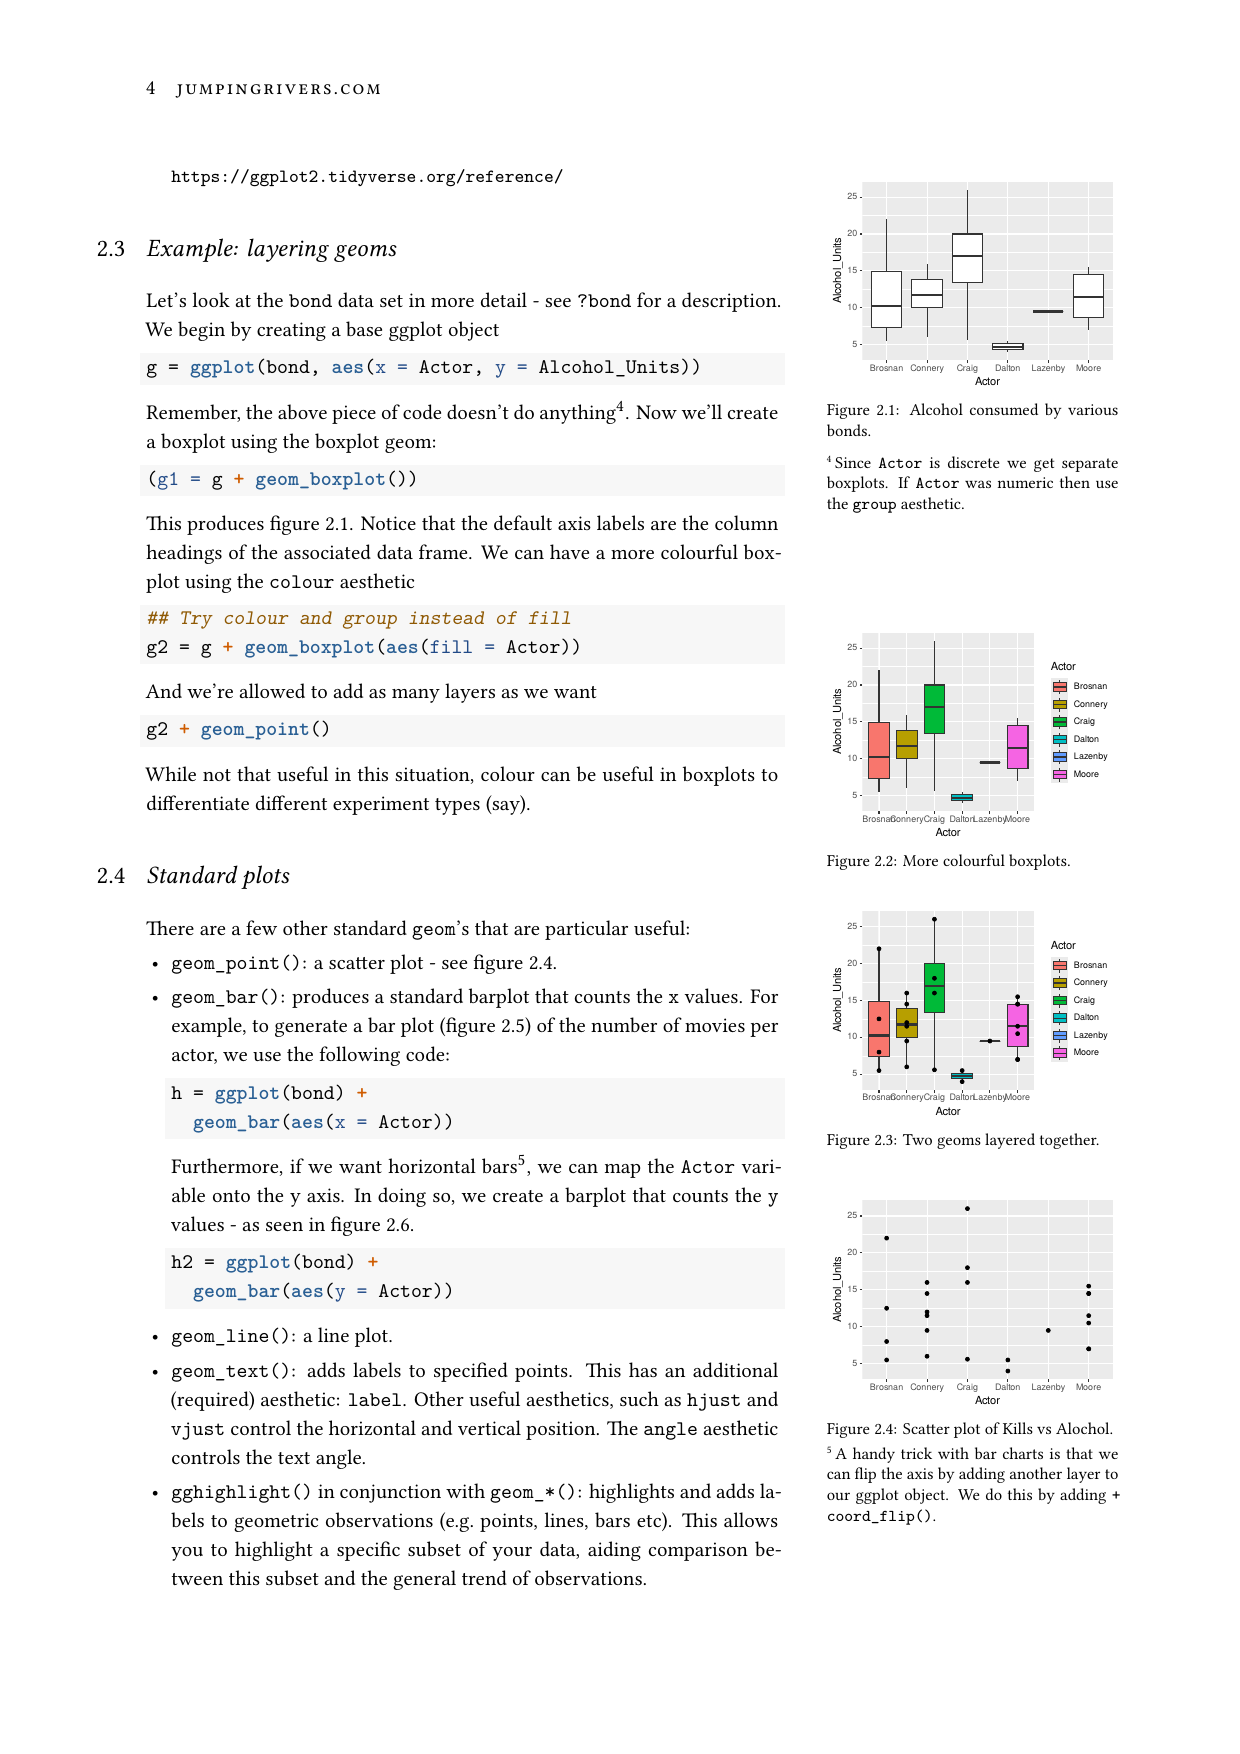 Page 4 of example course material for  Data Visualisation with ggplot2